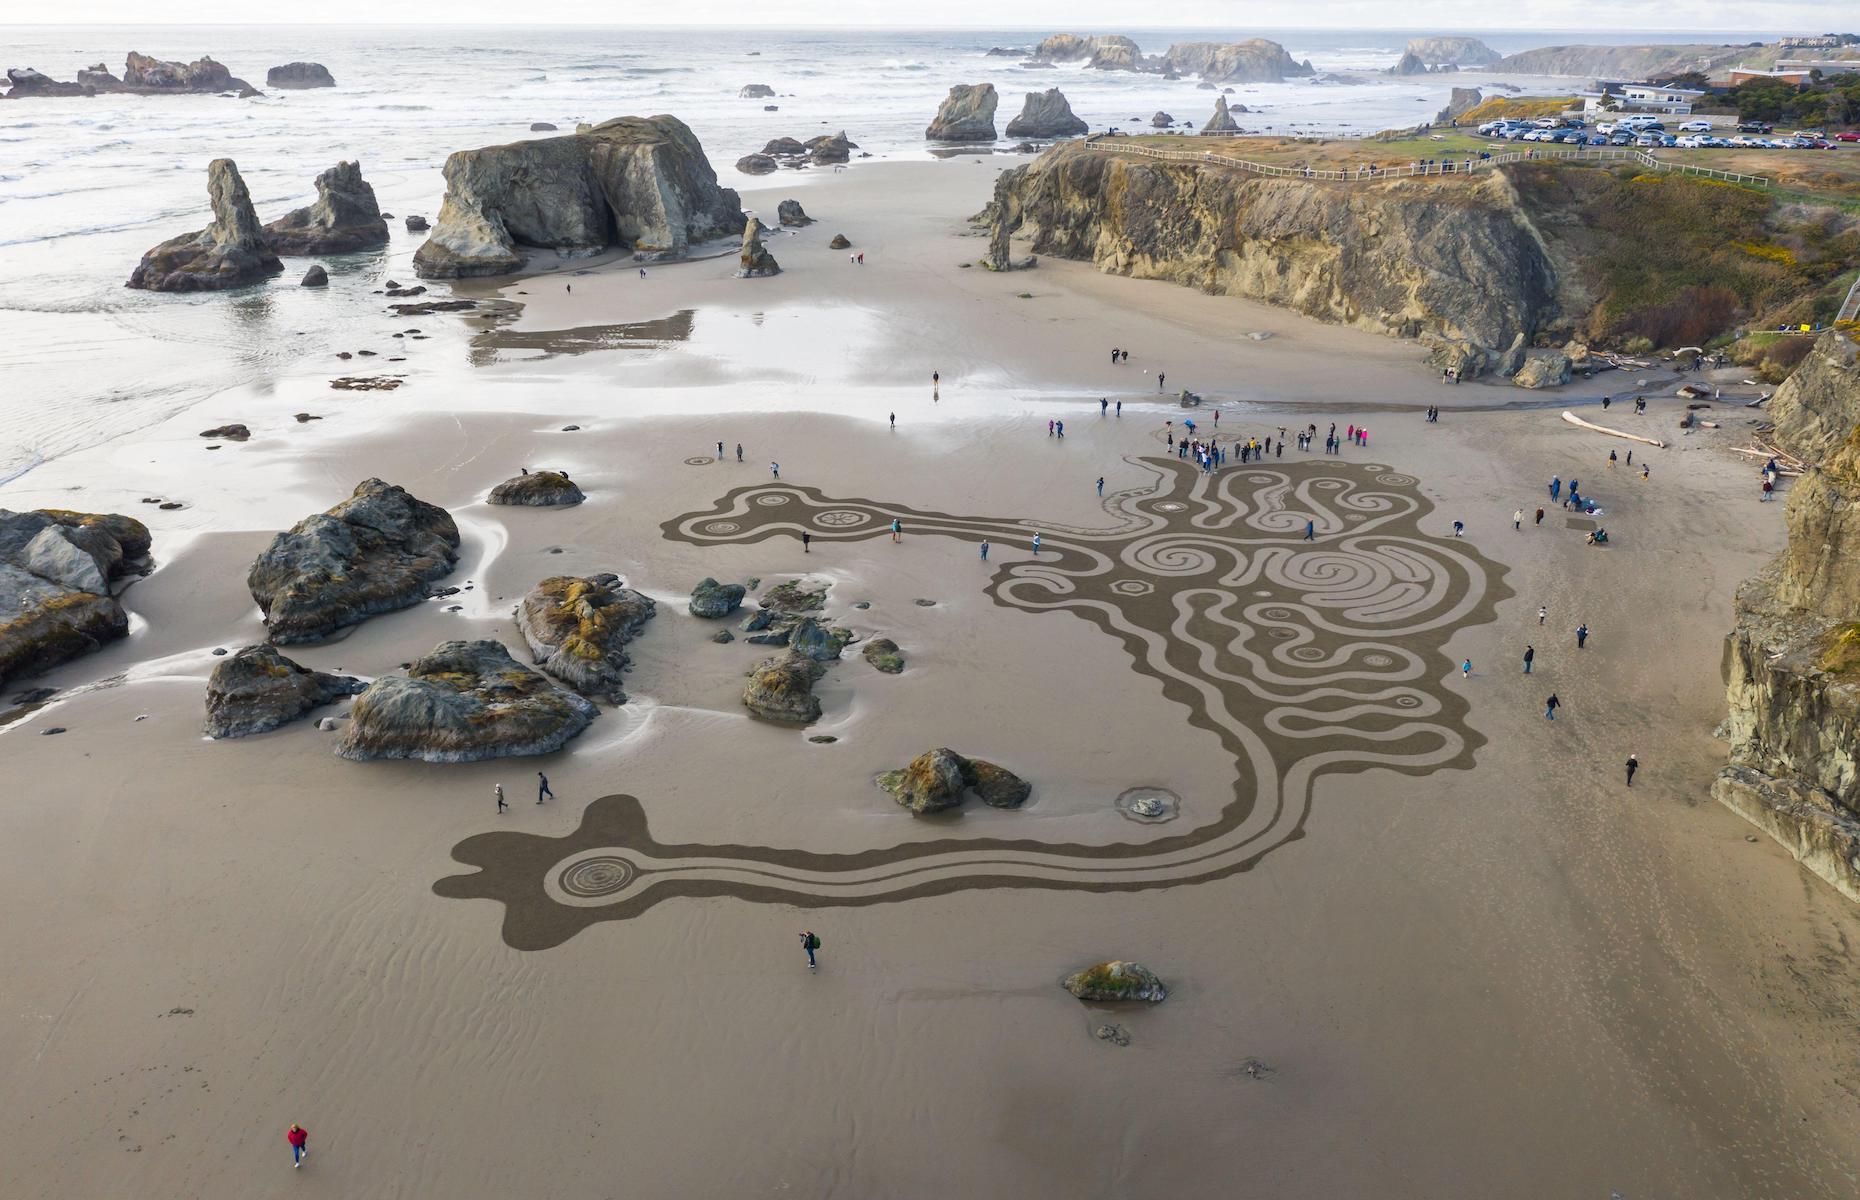 <p>The mesmerizing <a href="https://www.sandypathbandon.com">Circles in the Sand have appeared at Face Rock Viewpoint in Bandon, Oregon since 2015</a>, when artist Denny Dyke first began creating the labyrinths – or “dreamfields” as he calls them – at low tide. Along with a team of volunteers, he creates the intricate “draws” over a period of two hours. When the work is finished people are allowed in to follow the sandy pathways before the tide washes them away.</p>  <p><strong><a href="https://www.loveexploring.com/galleries/73350/the-strangest-things-to-ever-wash-up-on-the-beach?page=1">These are the strangest things to ever wash up on the beach</a></strong></p>